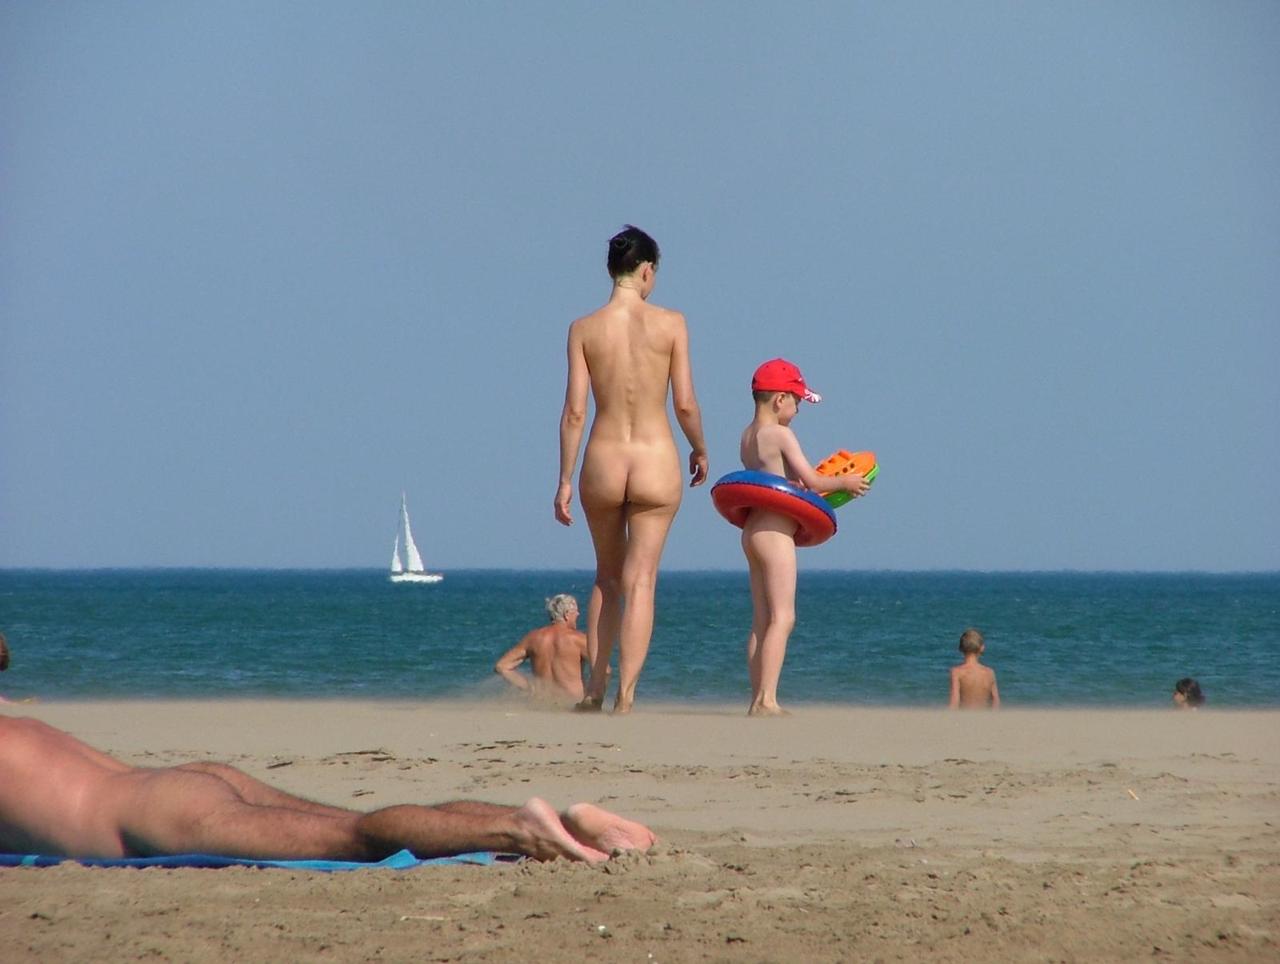 French nudist beach dagde best adult free images